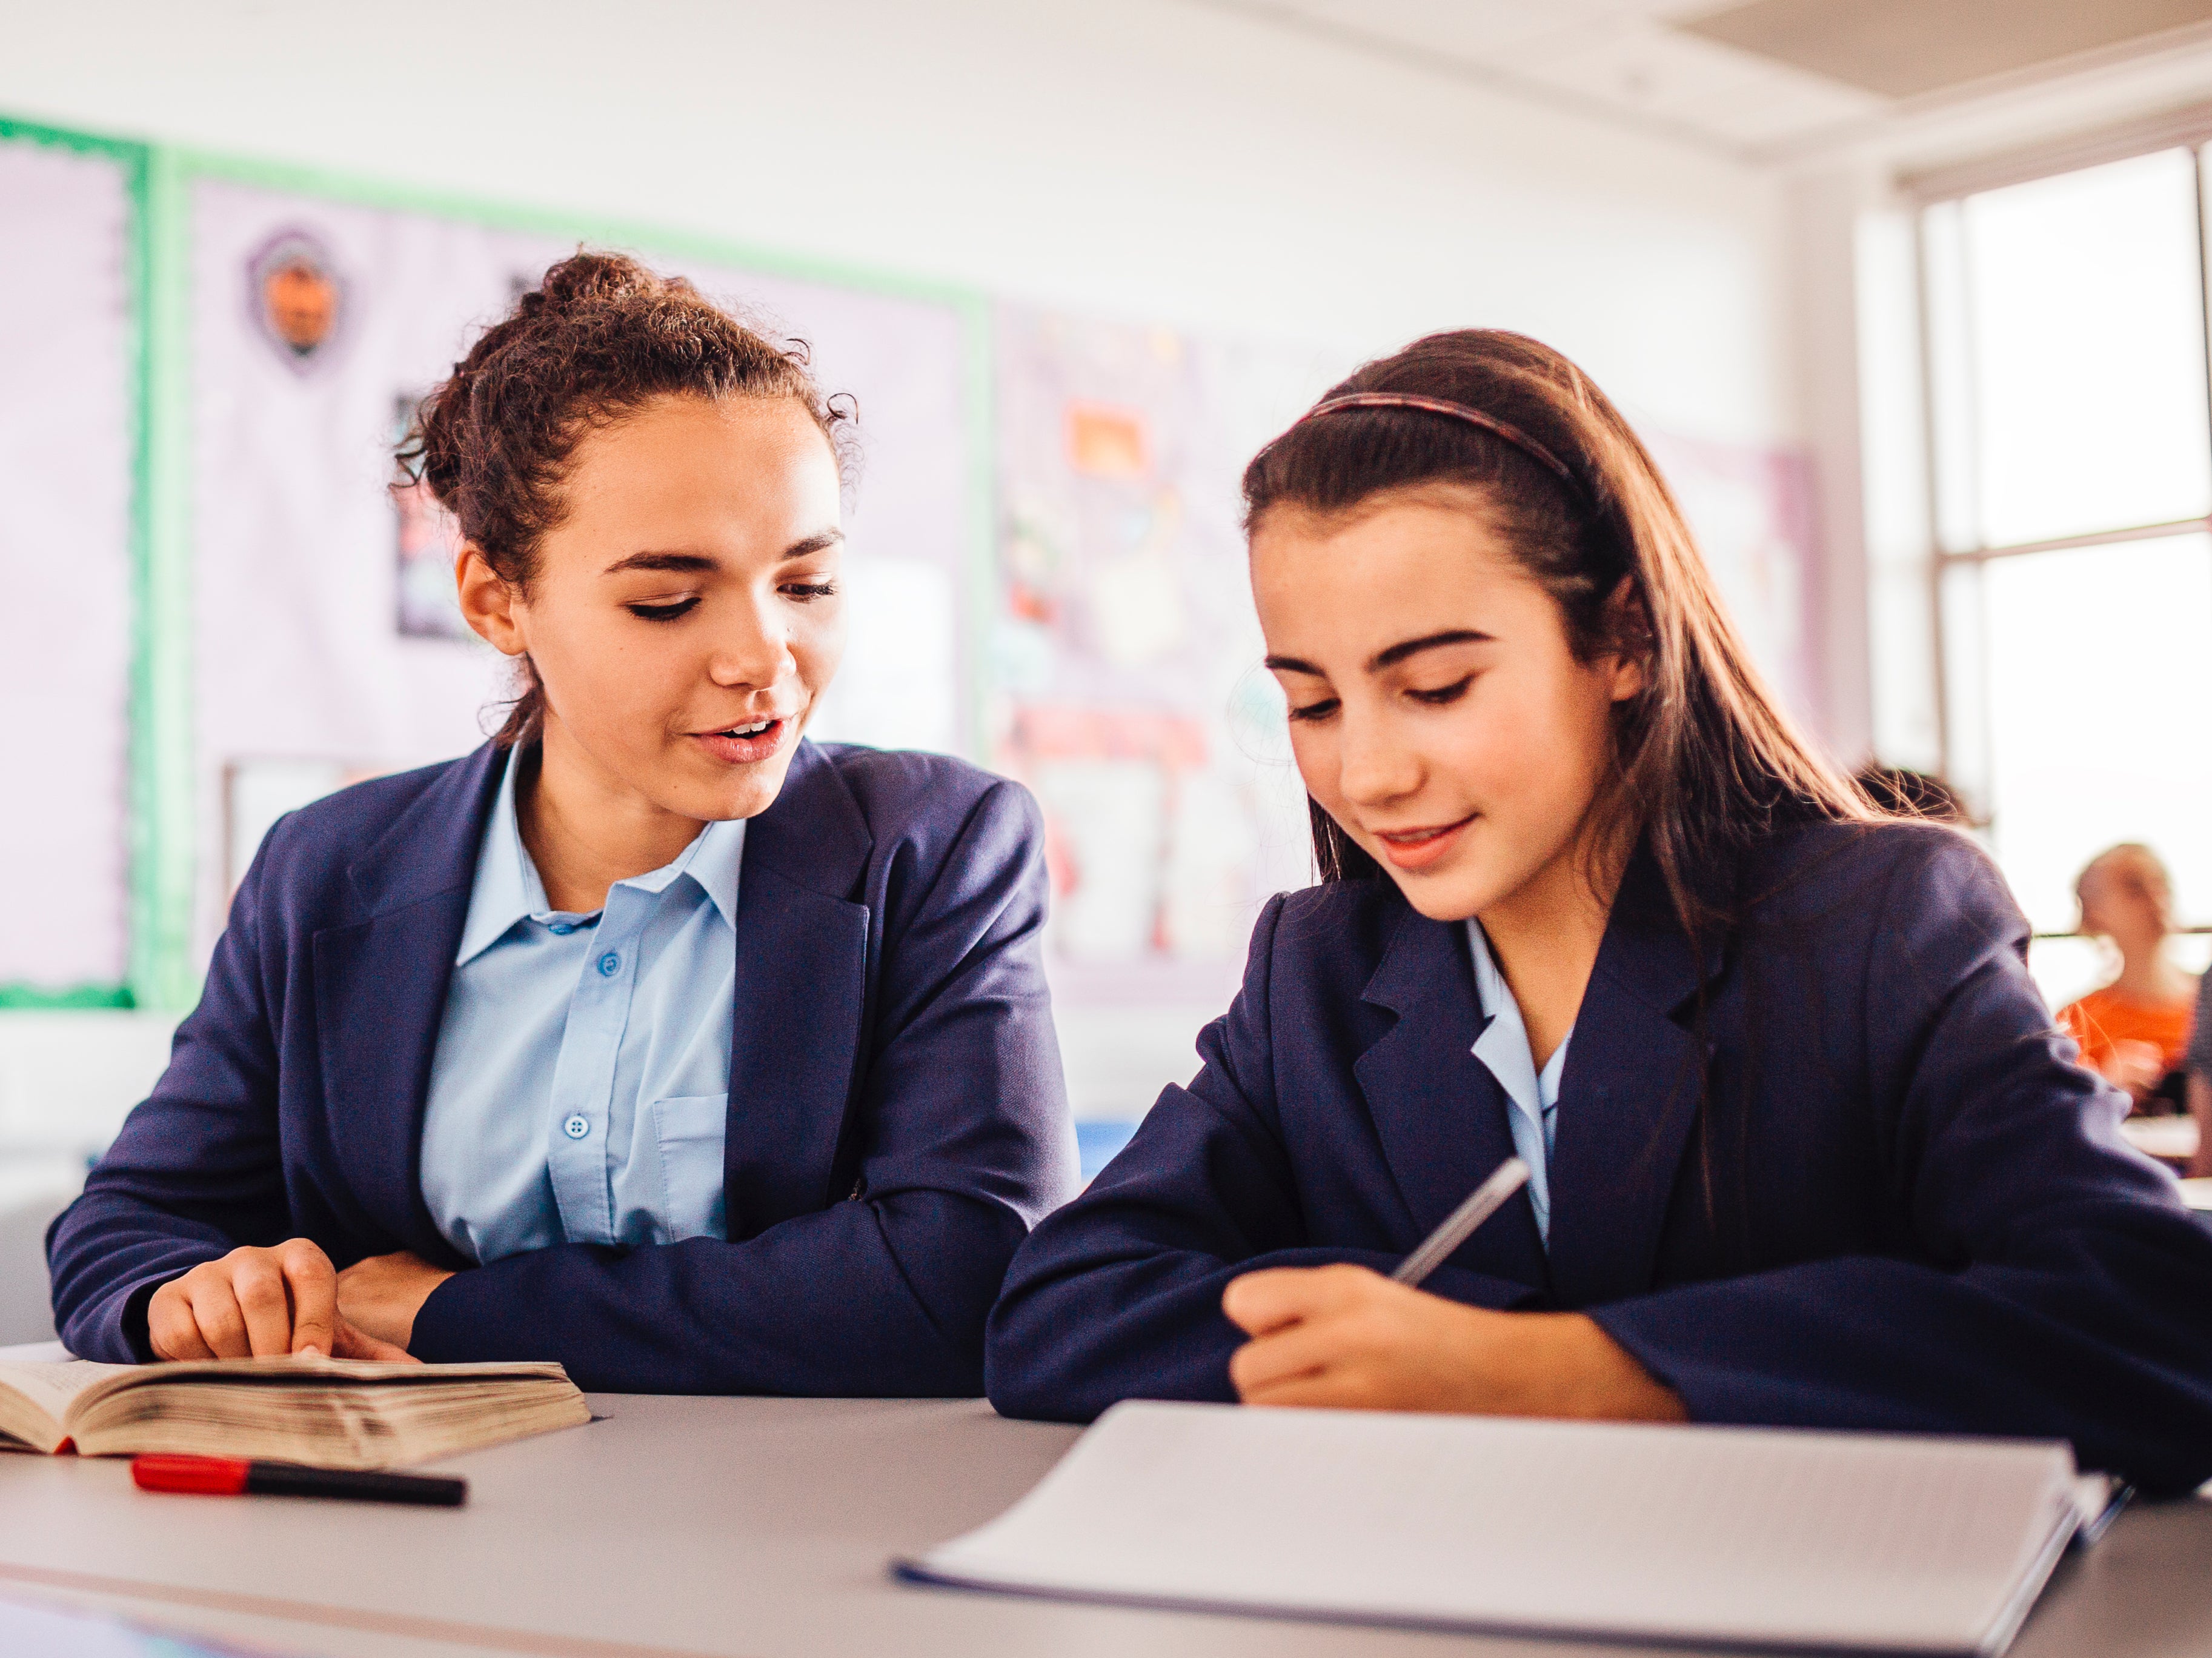 Researchers found wellbeing and confidence levels are similar in boys and girls at the end of primary school and both decline, but girls suffer a larger plummet by they reach the age of 14